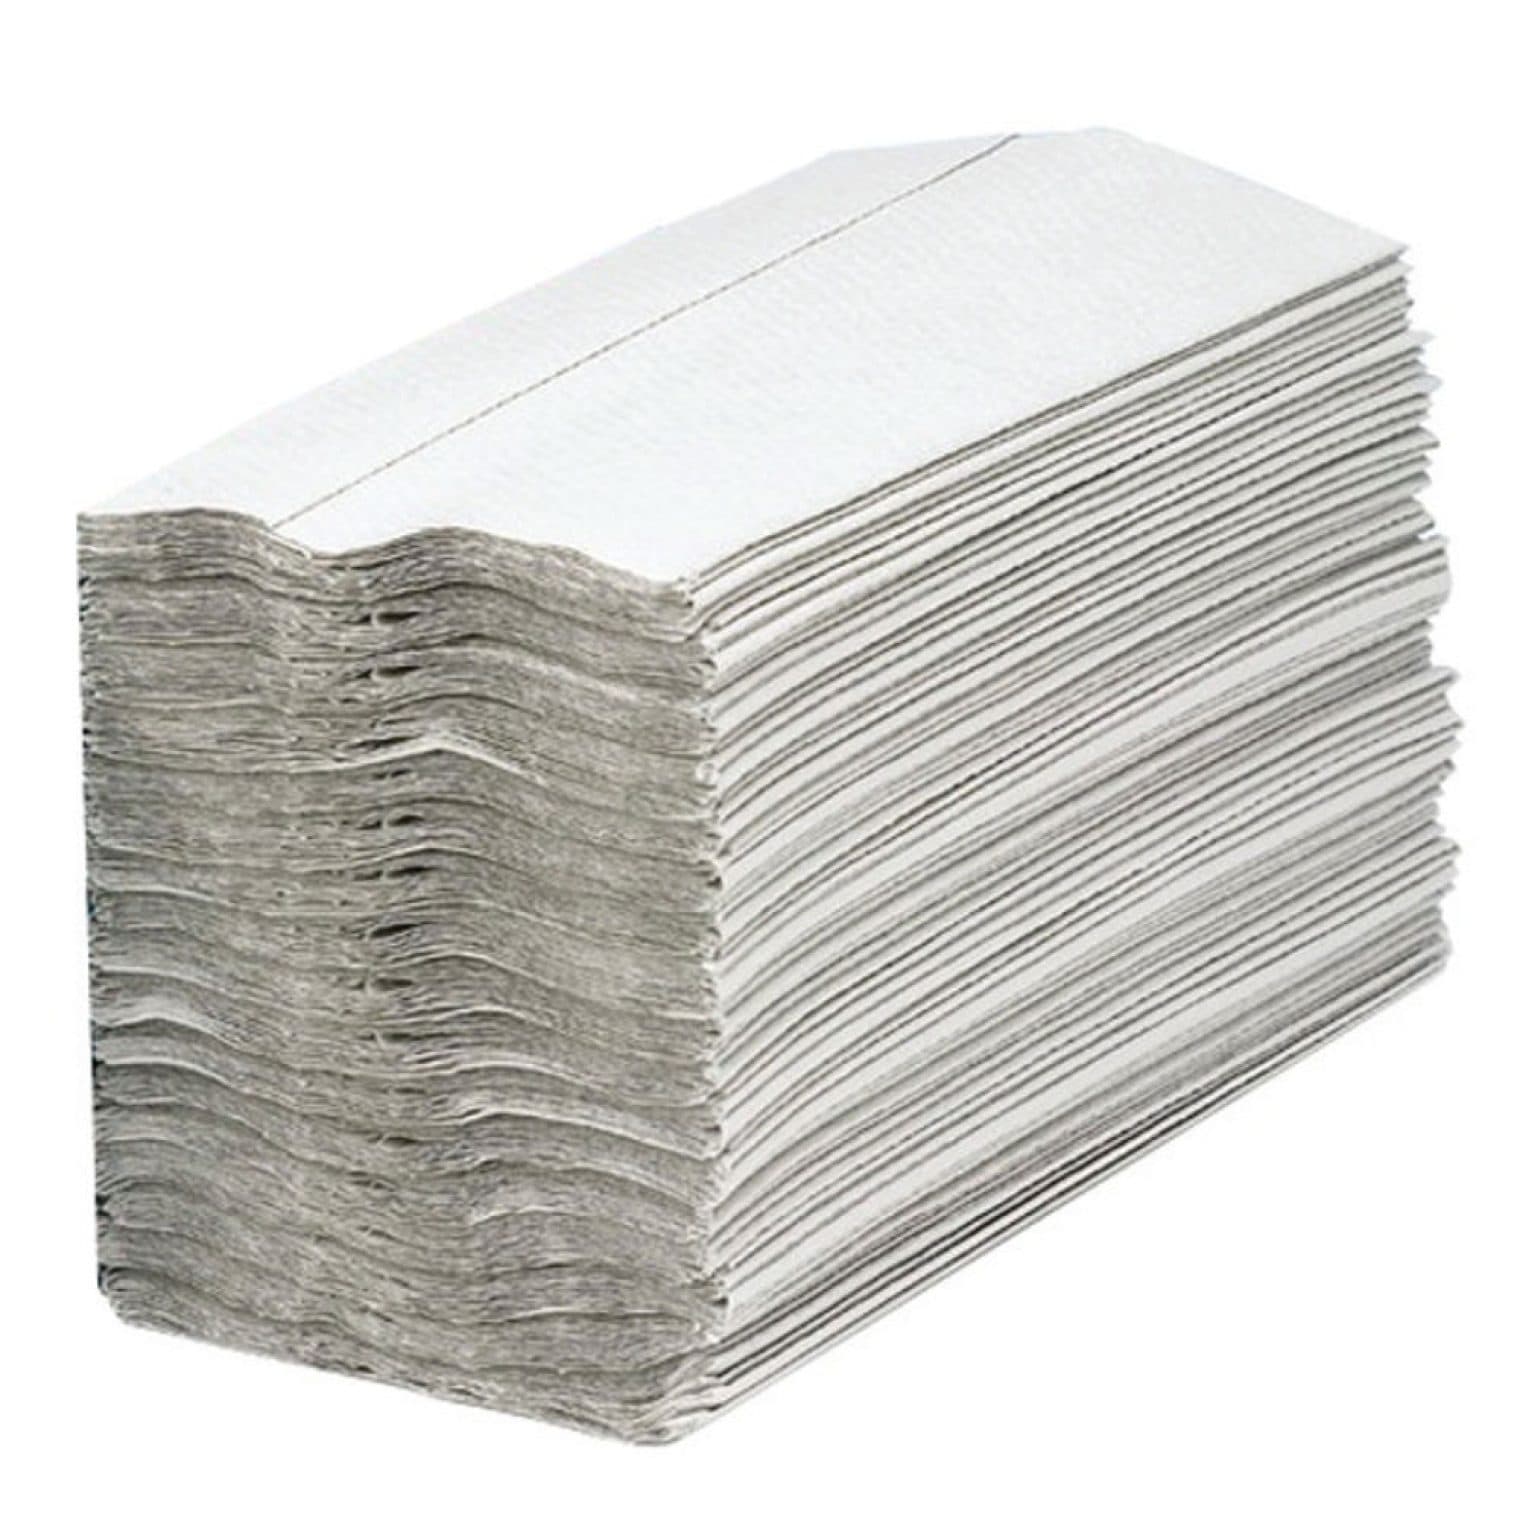 C-Fold Hand Towels 2-Ply (White)